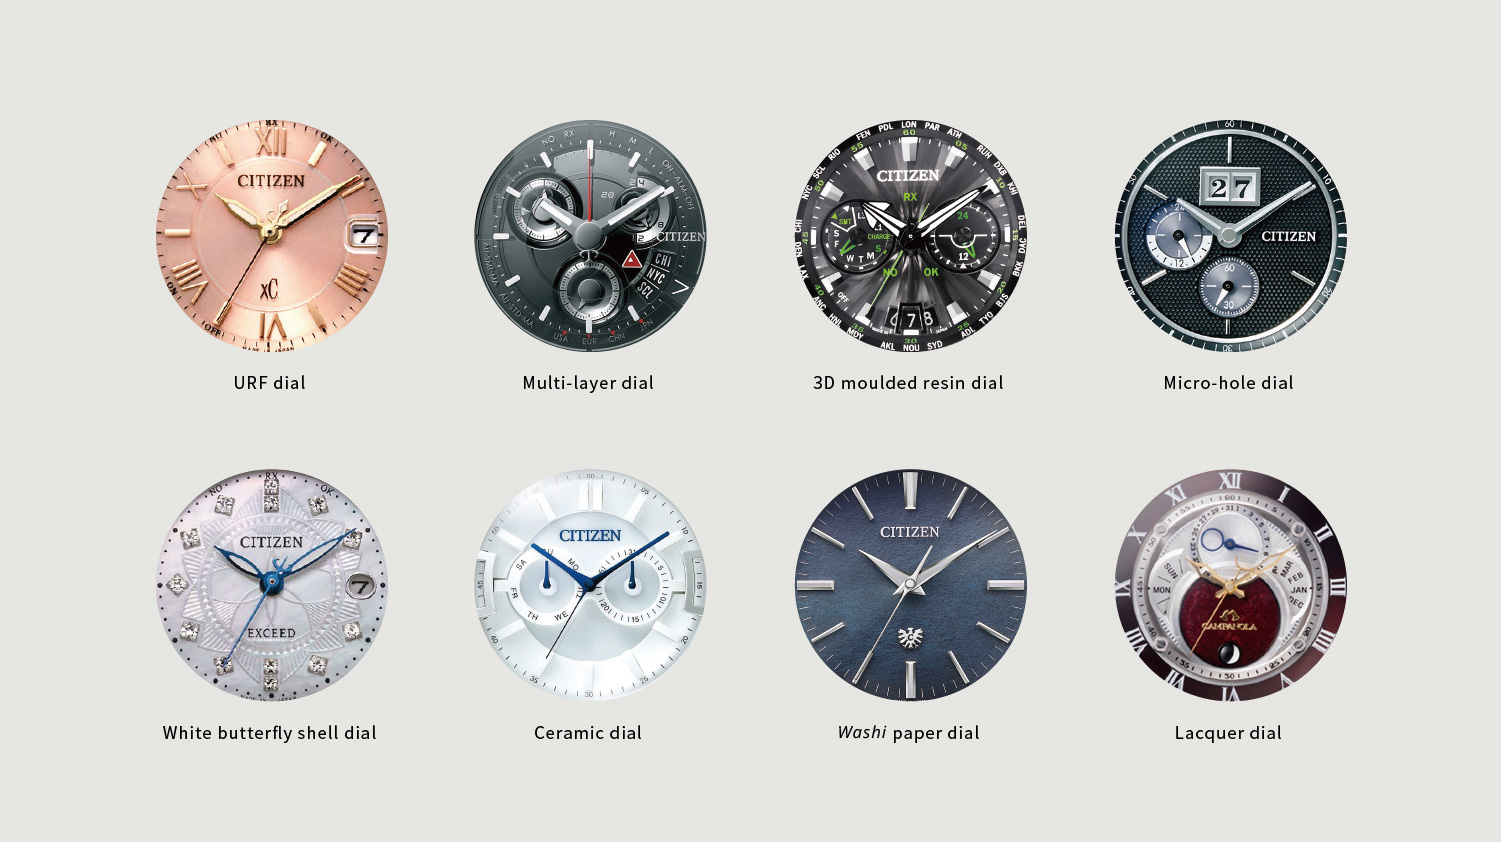 Some Eco-Drive dial types